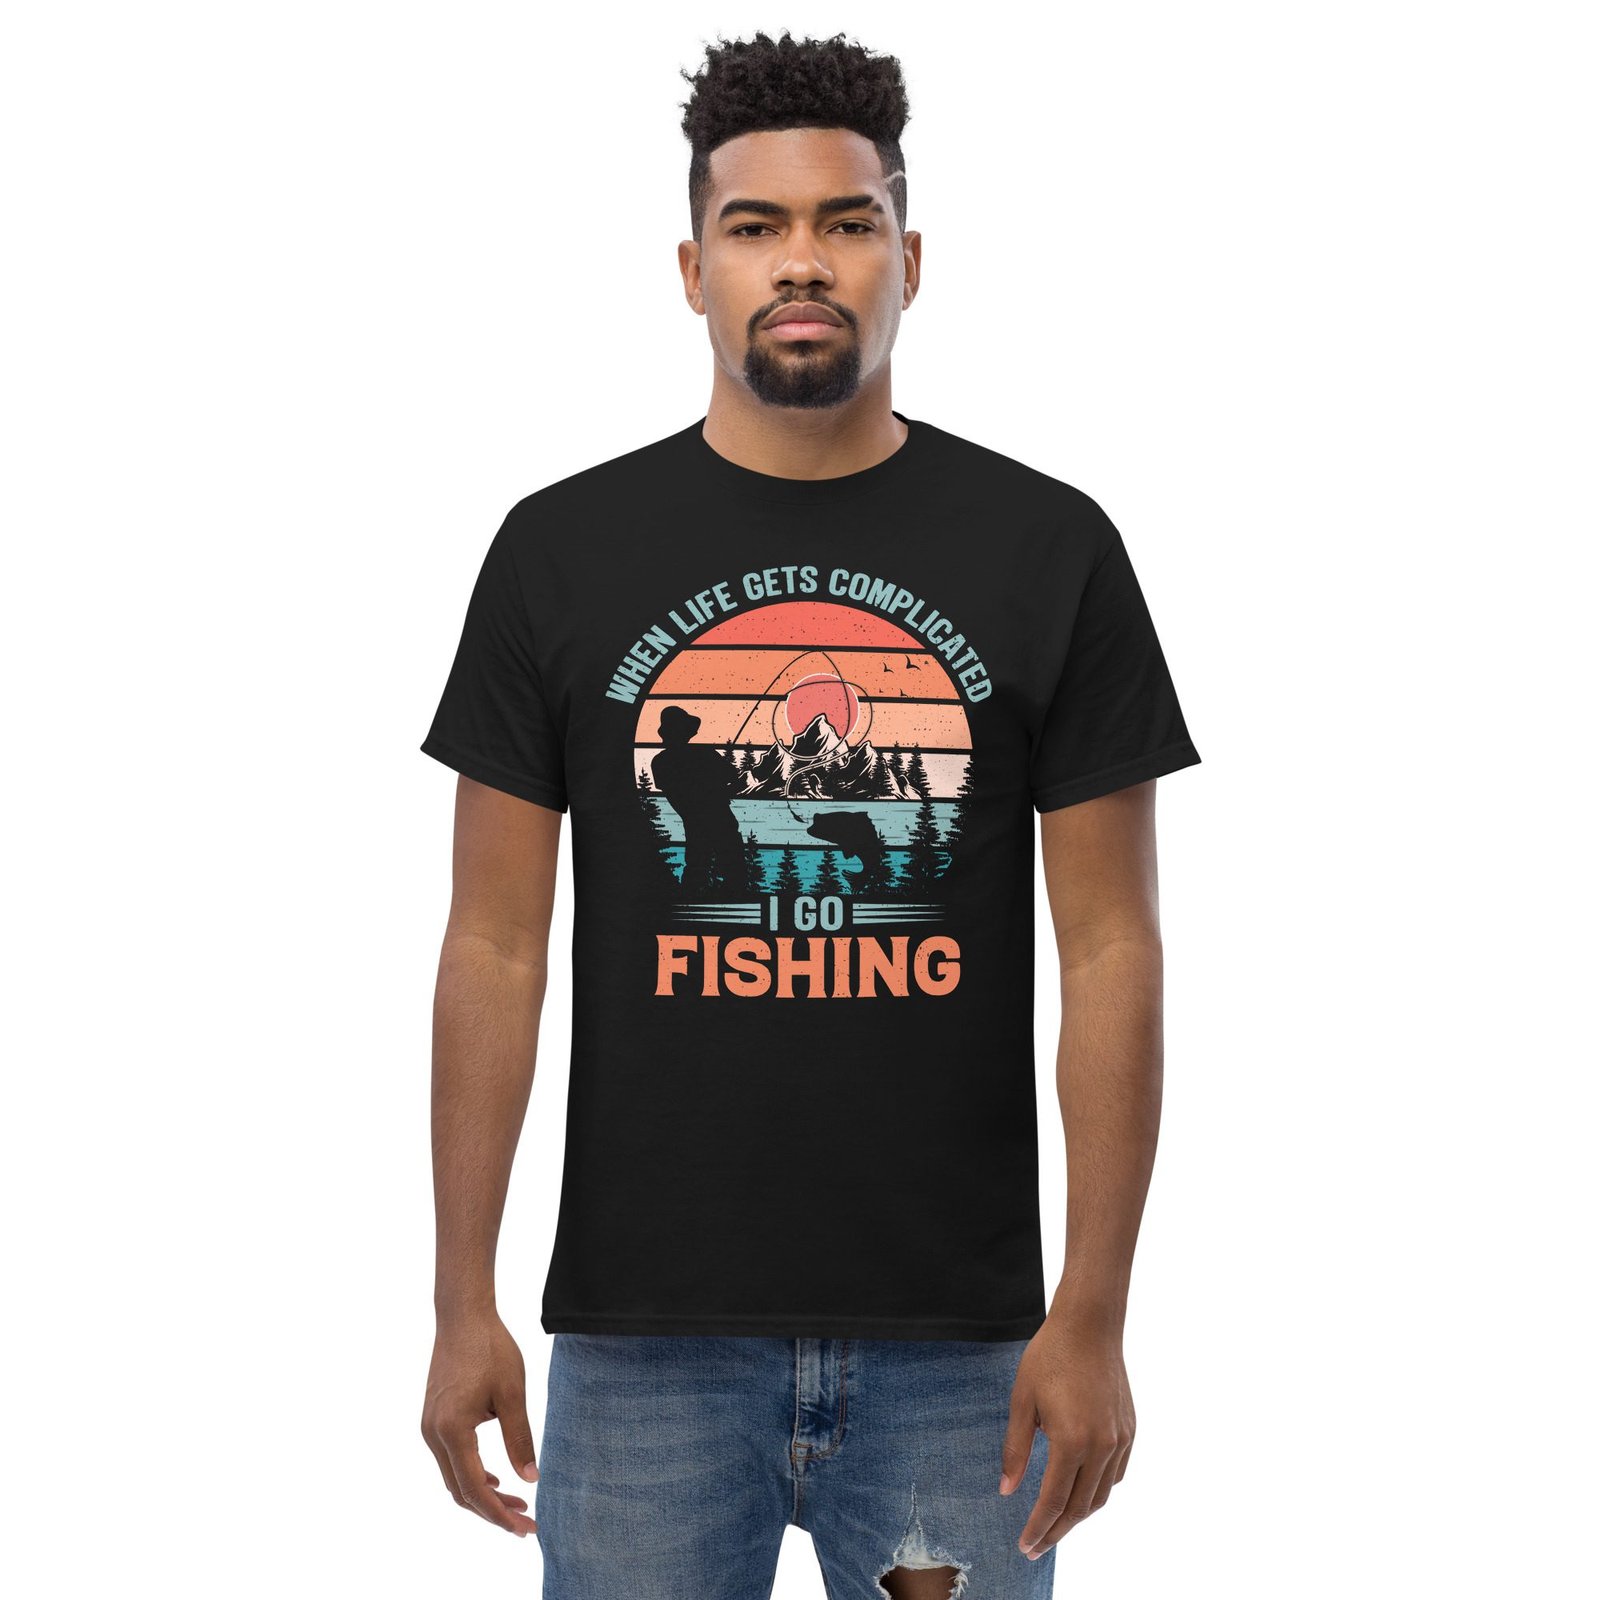 When life gets compliacted I go fishing Men's classic tee –